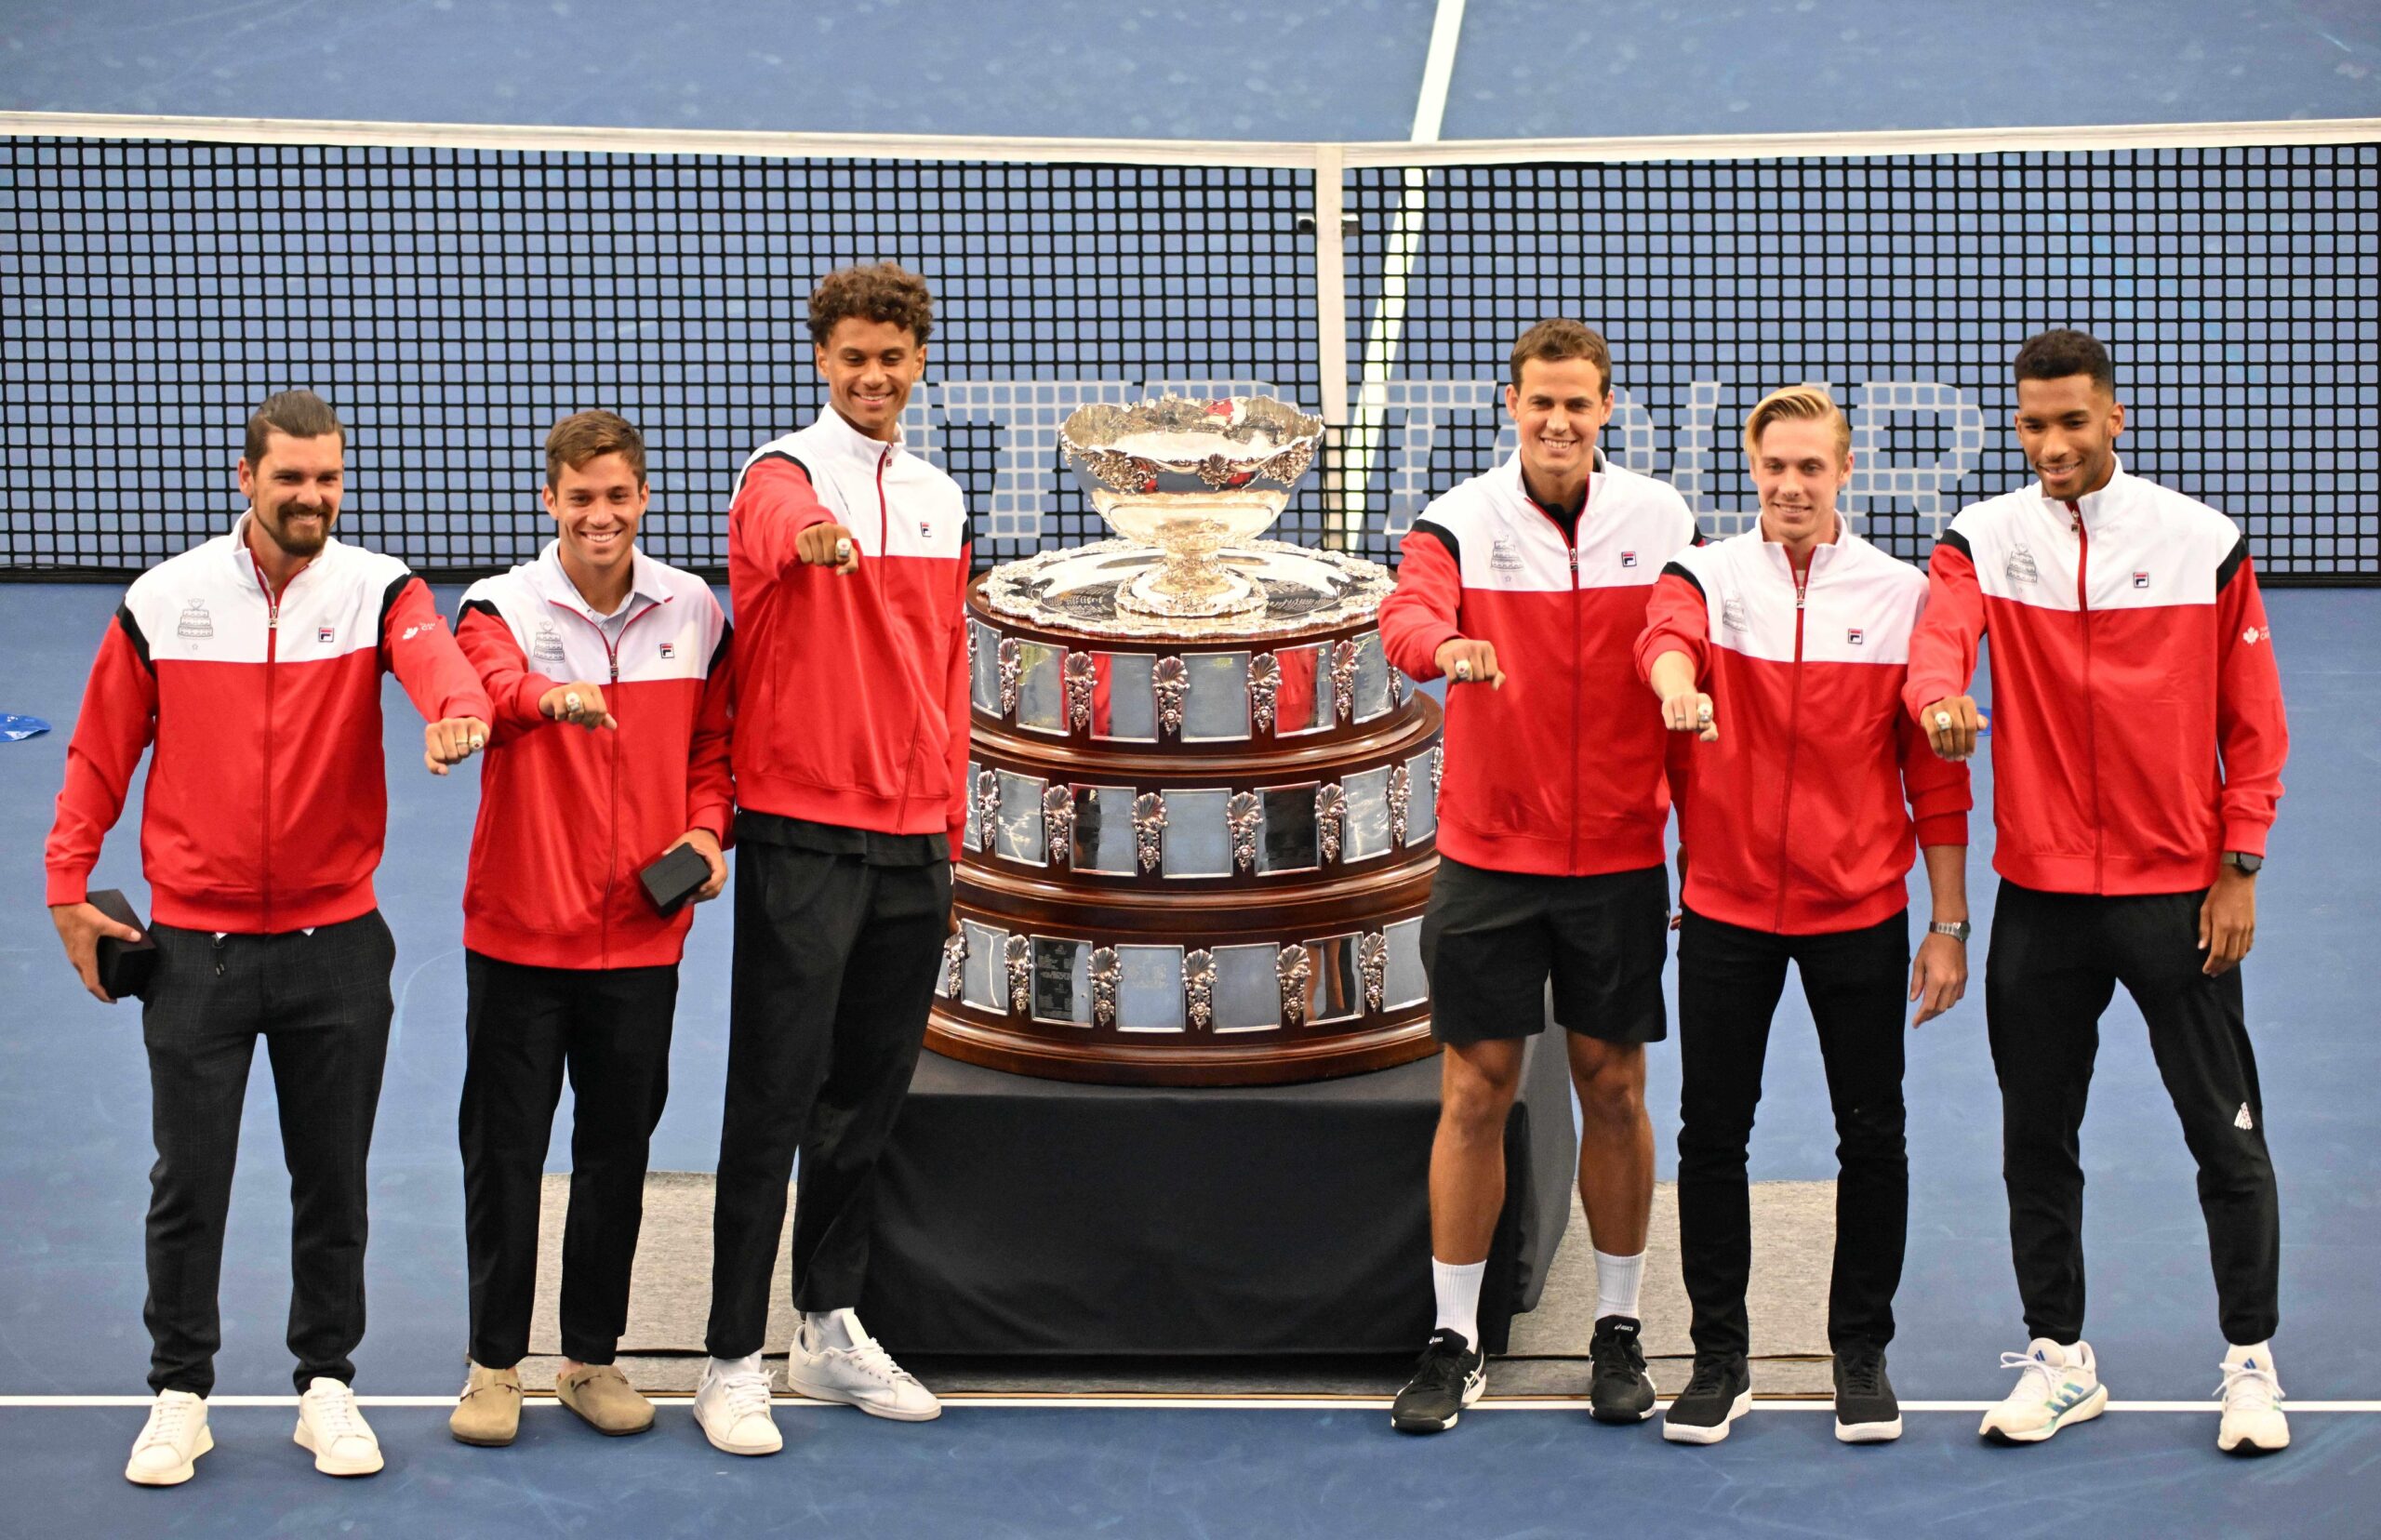 The Davis Cup, won last year by Canada, is often referred to as the Tennis World Cup.